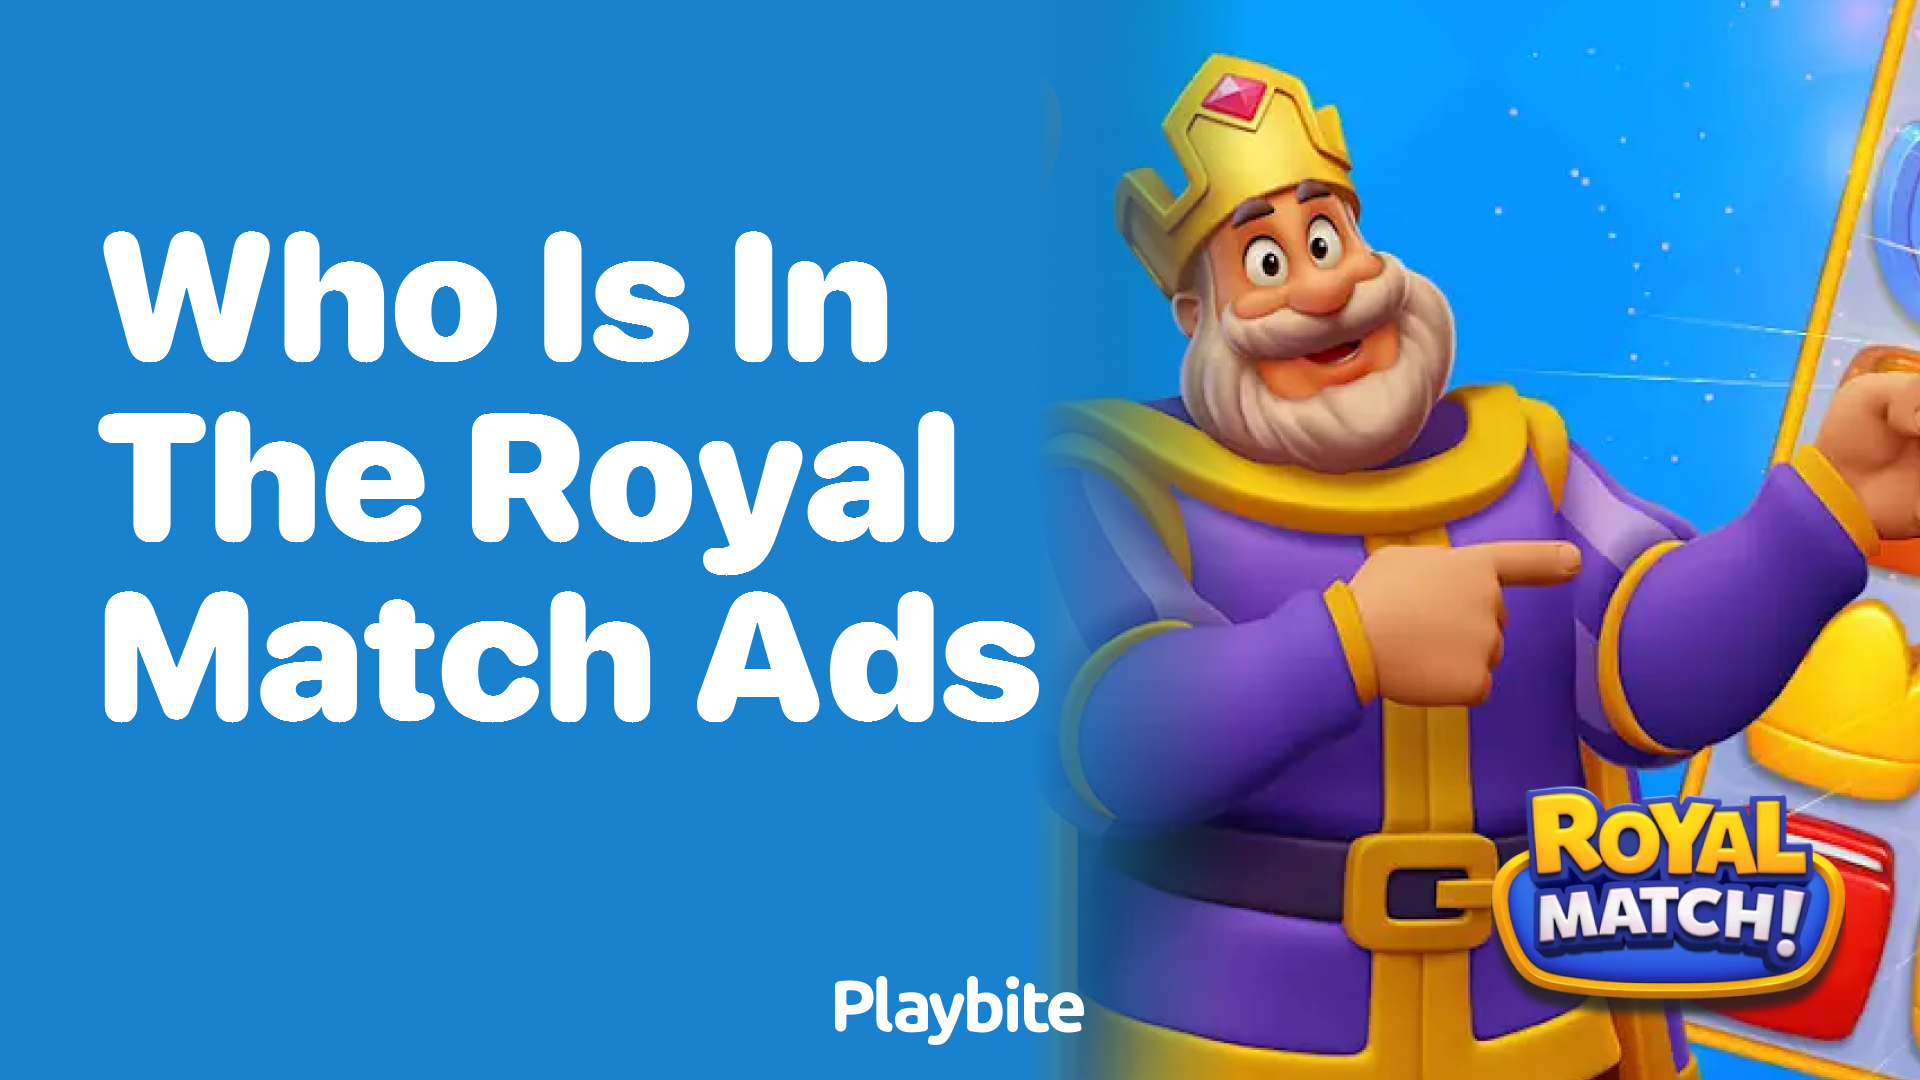 Who Is in the Royal Match Ads?